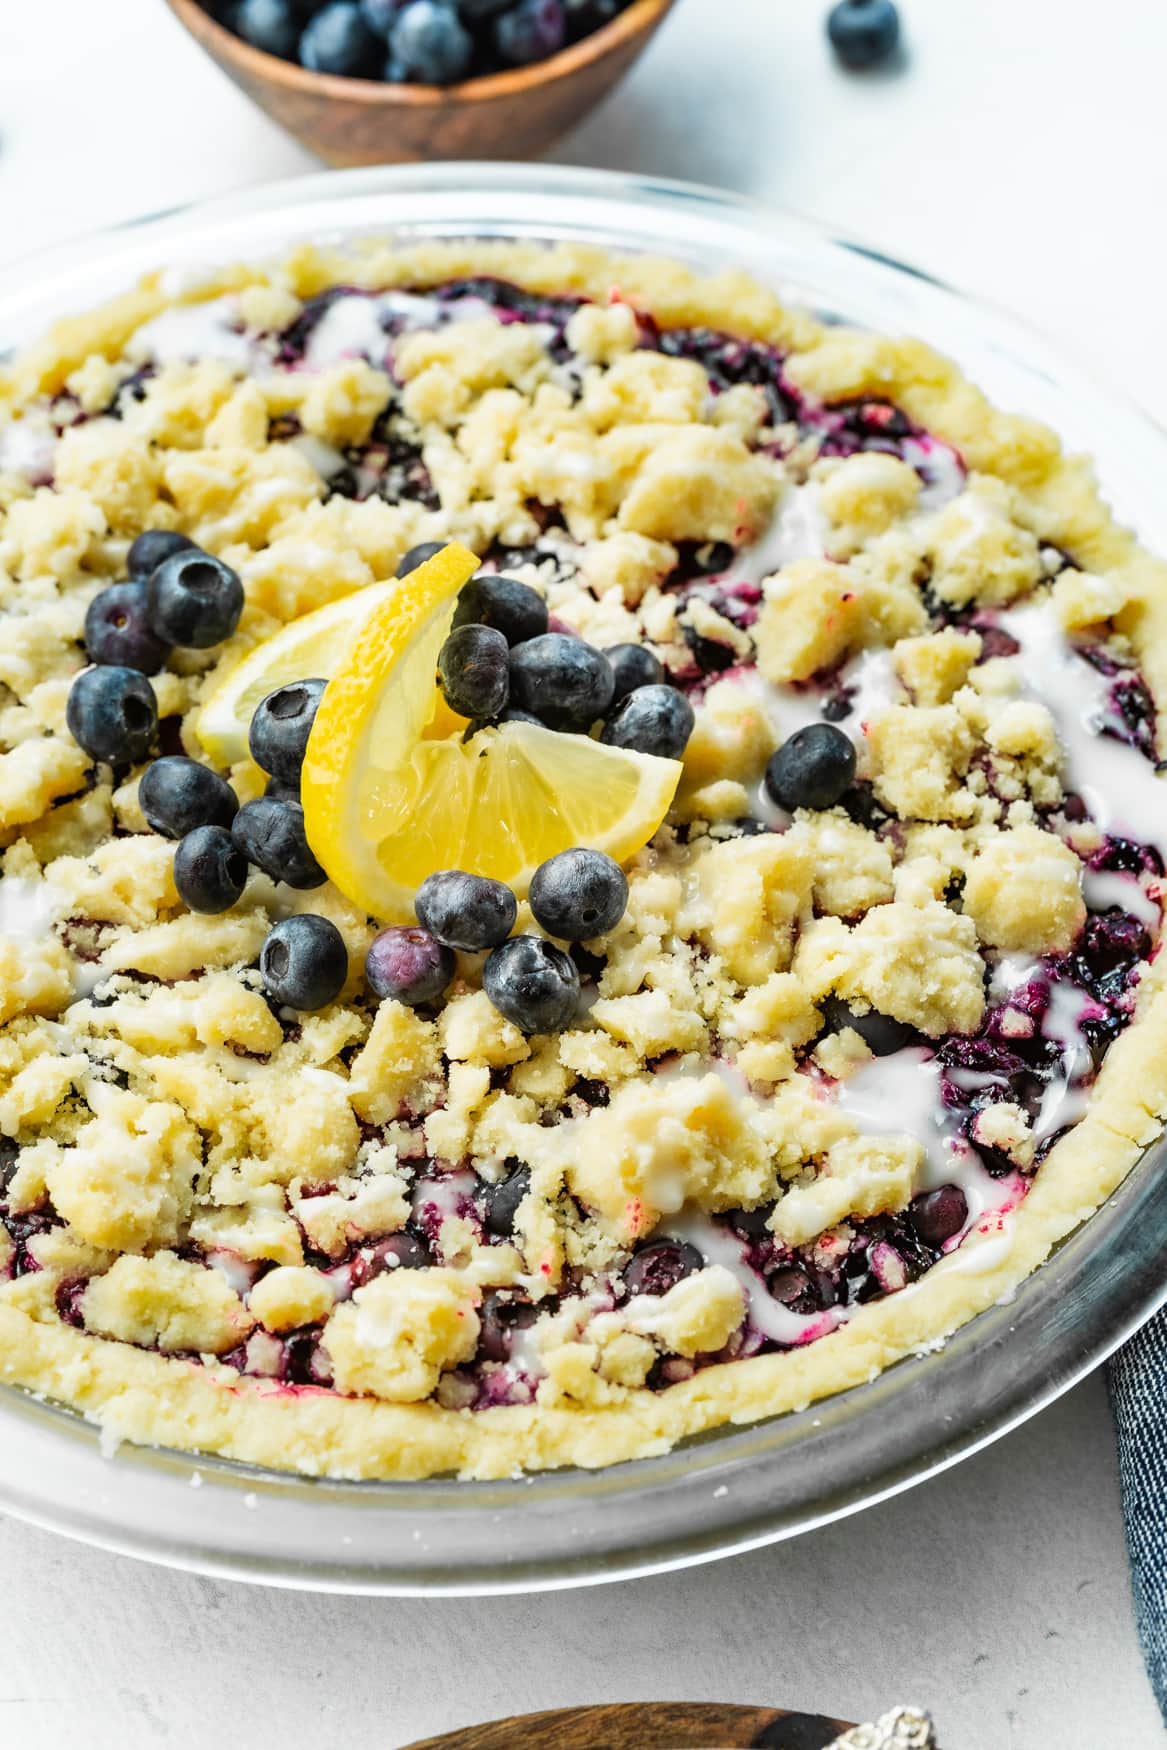 a photo of a whole baked wild blueberry pie in a shortbread crust with a streusel topping and a vanilla glaze.